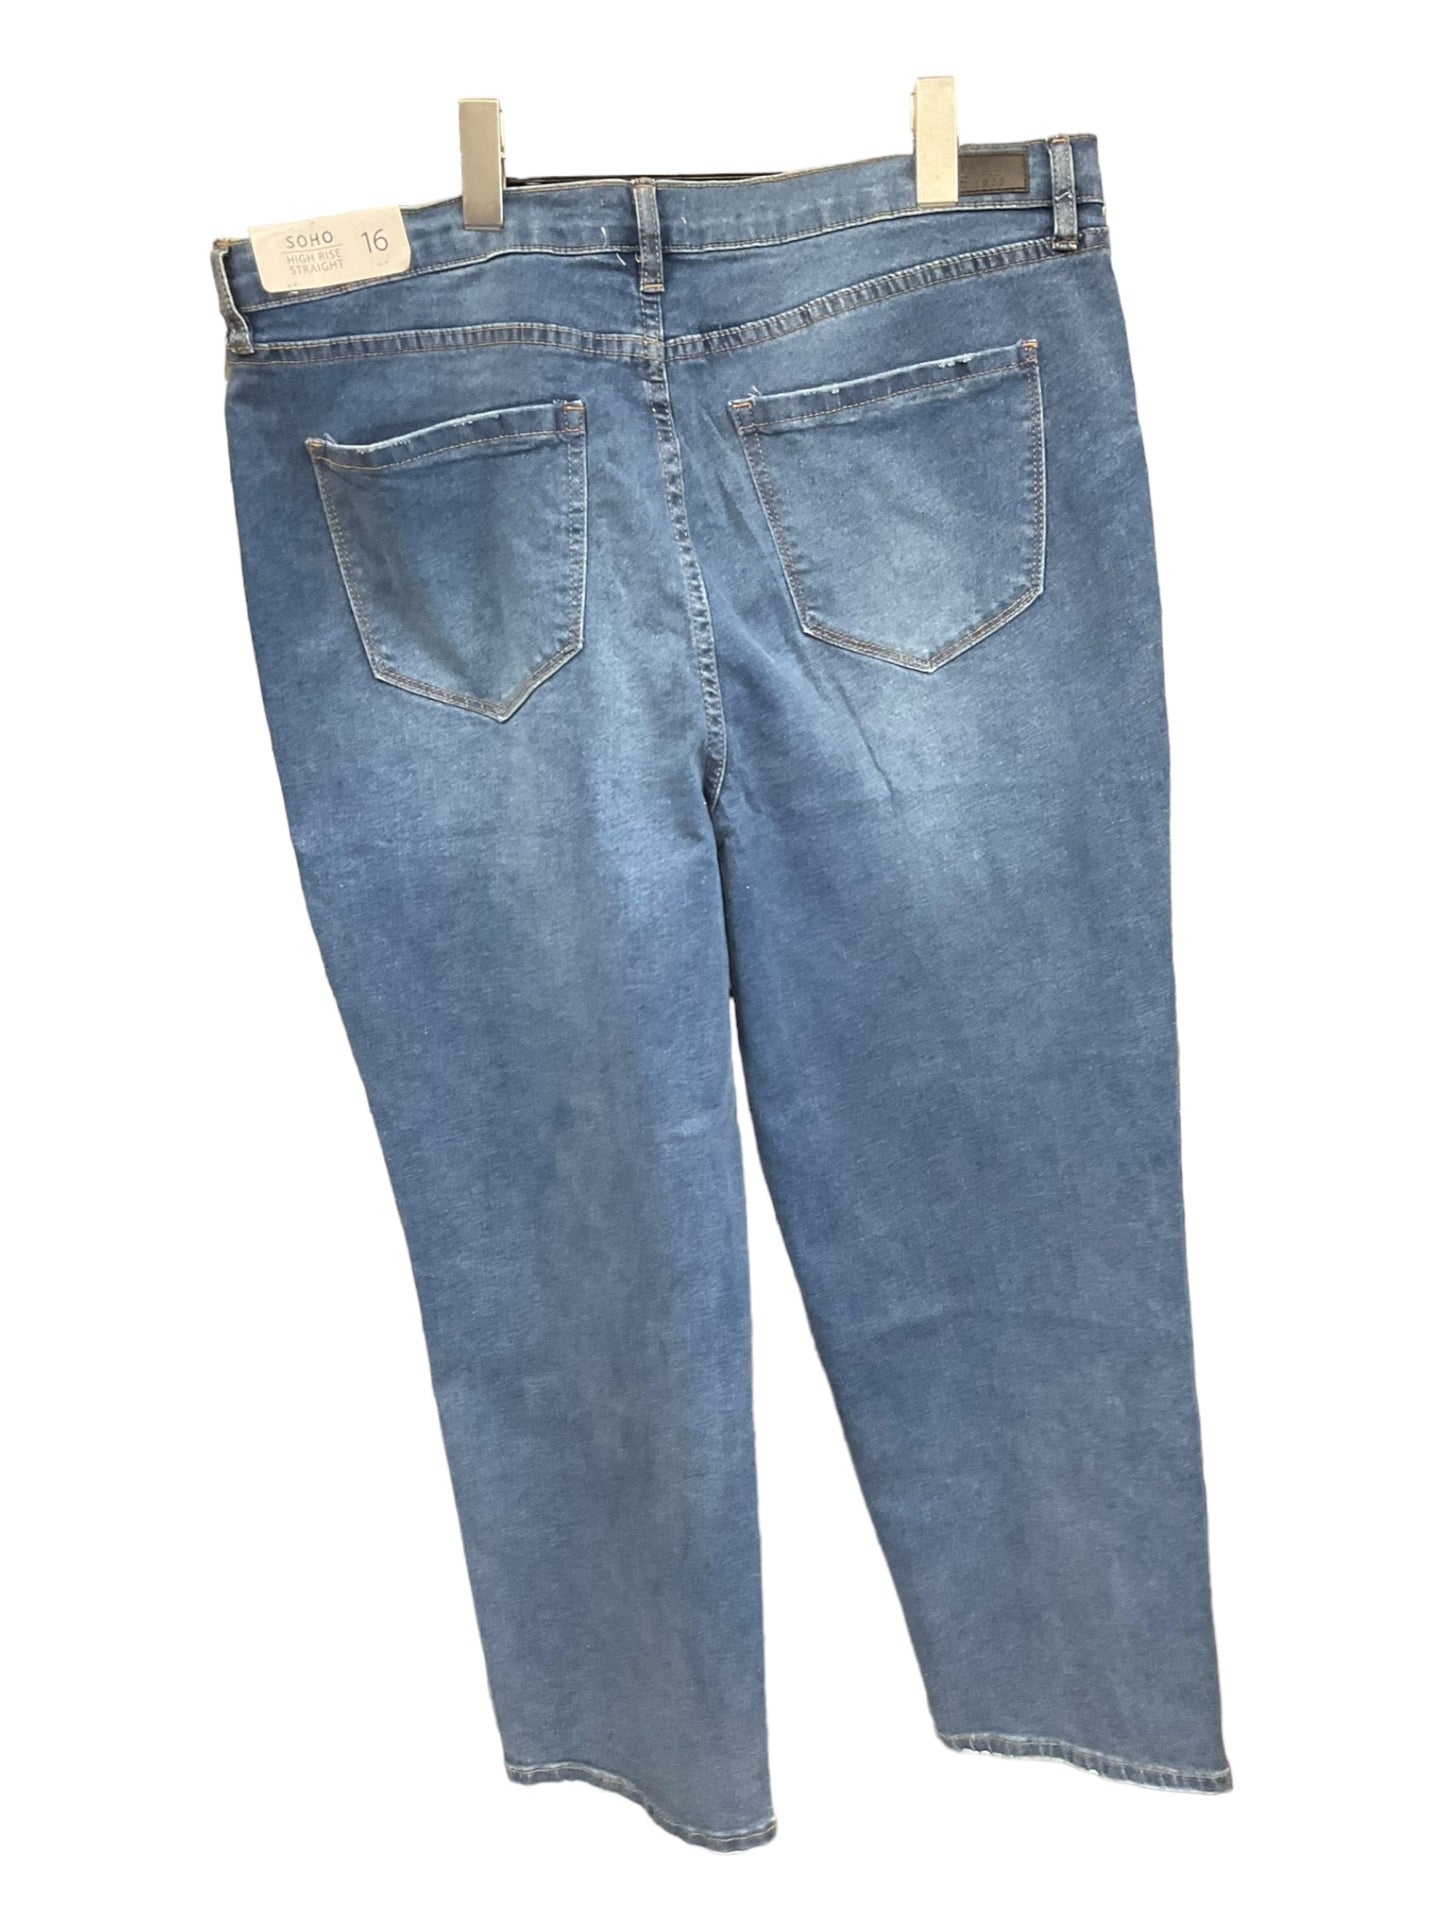 Jeans Straight By Nicole By Nicole Miller  Size: 16